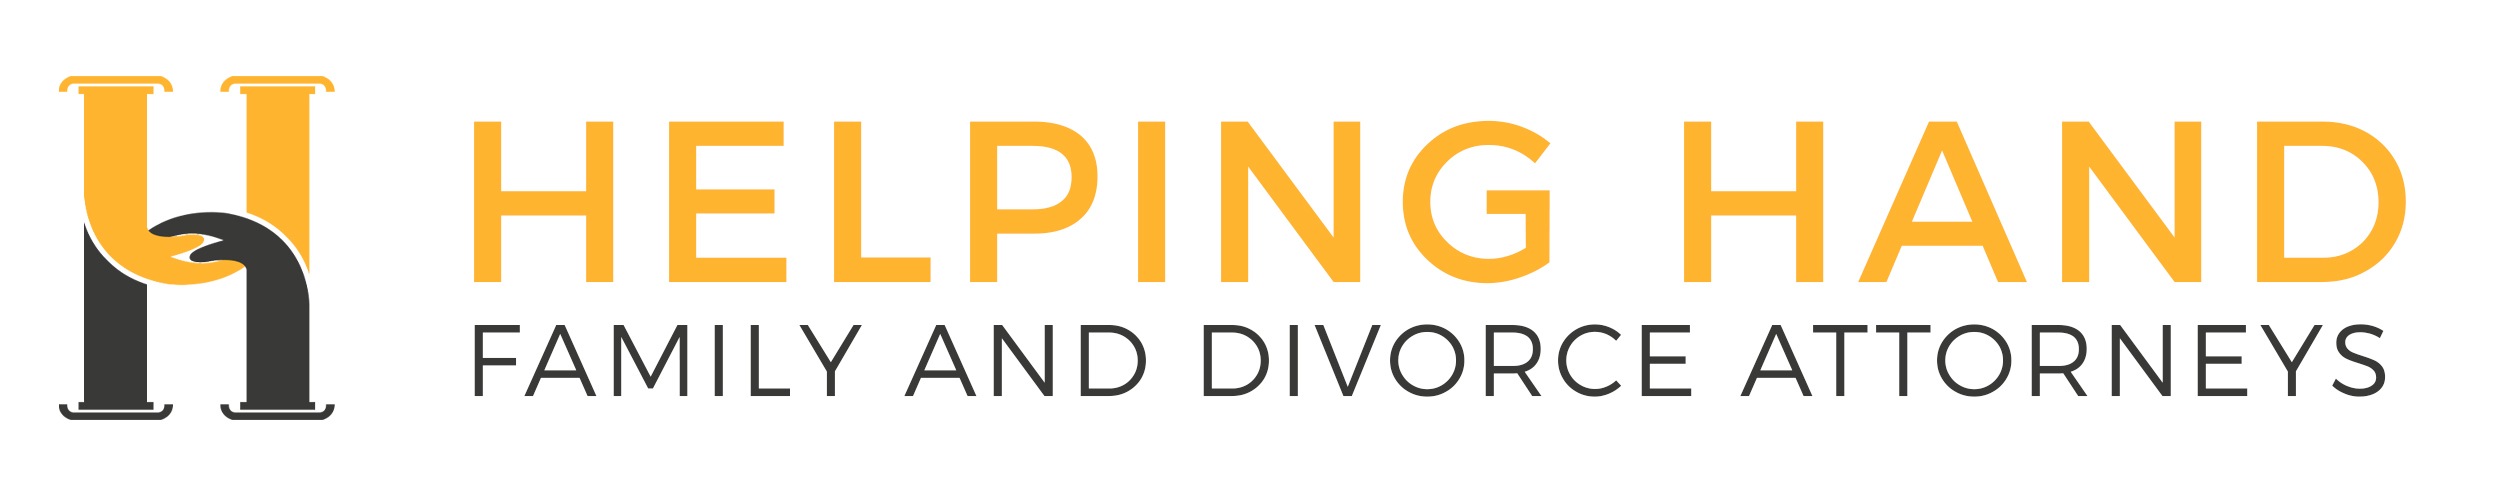 Helping-Hand-Family-and-Divorce-Attorneys-Logo-1.jpg